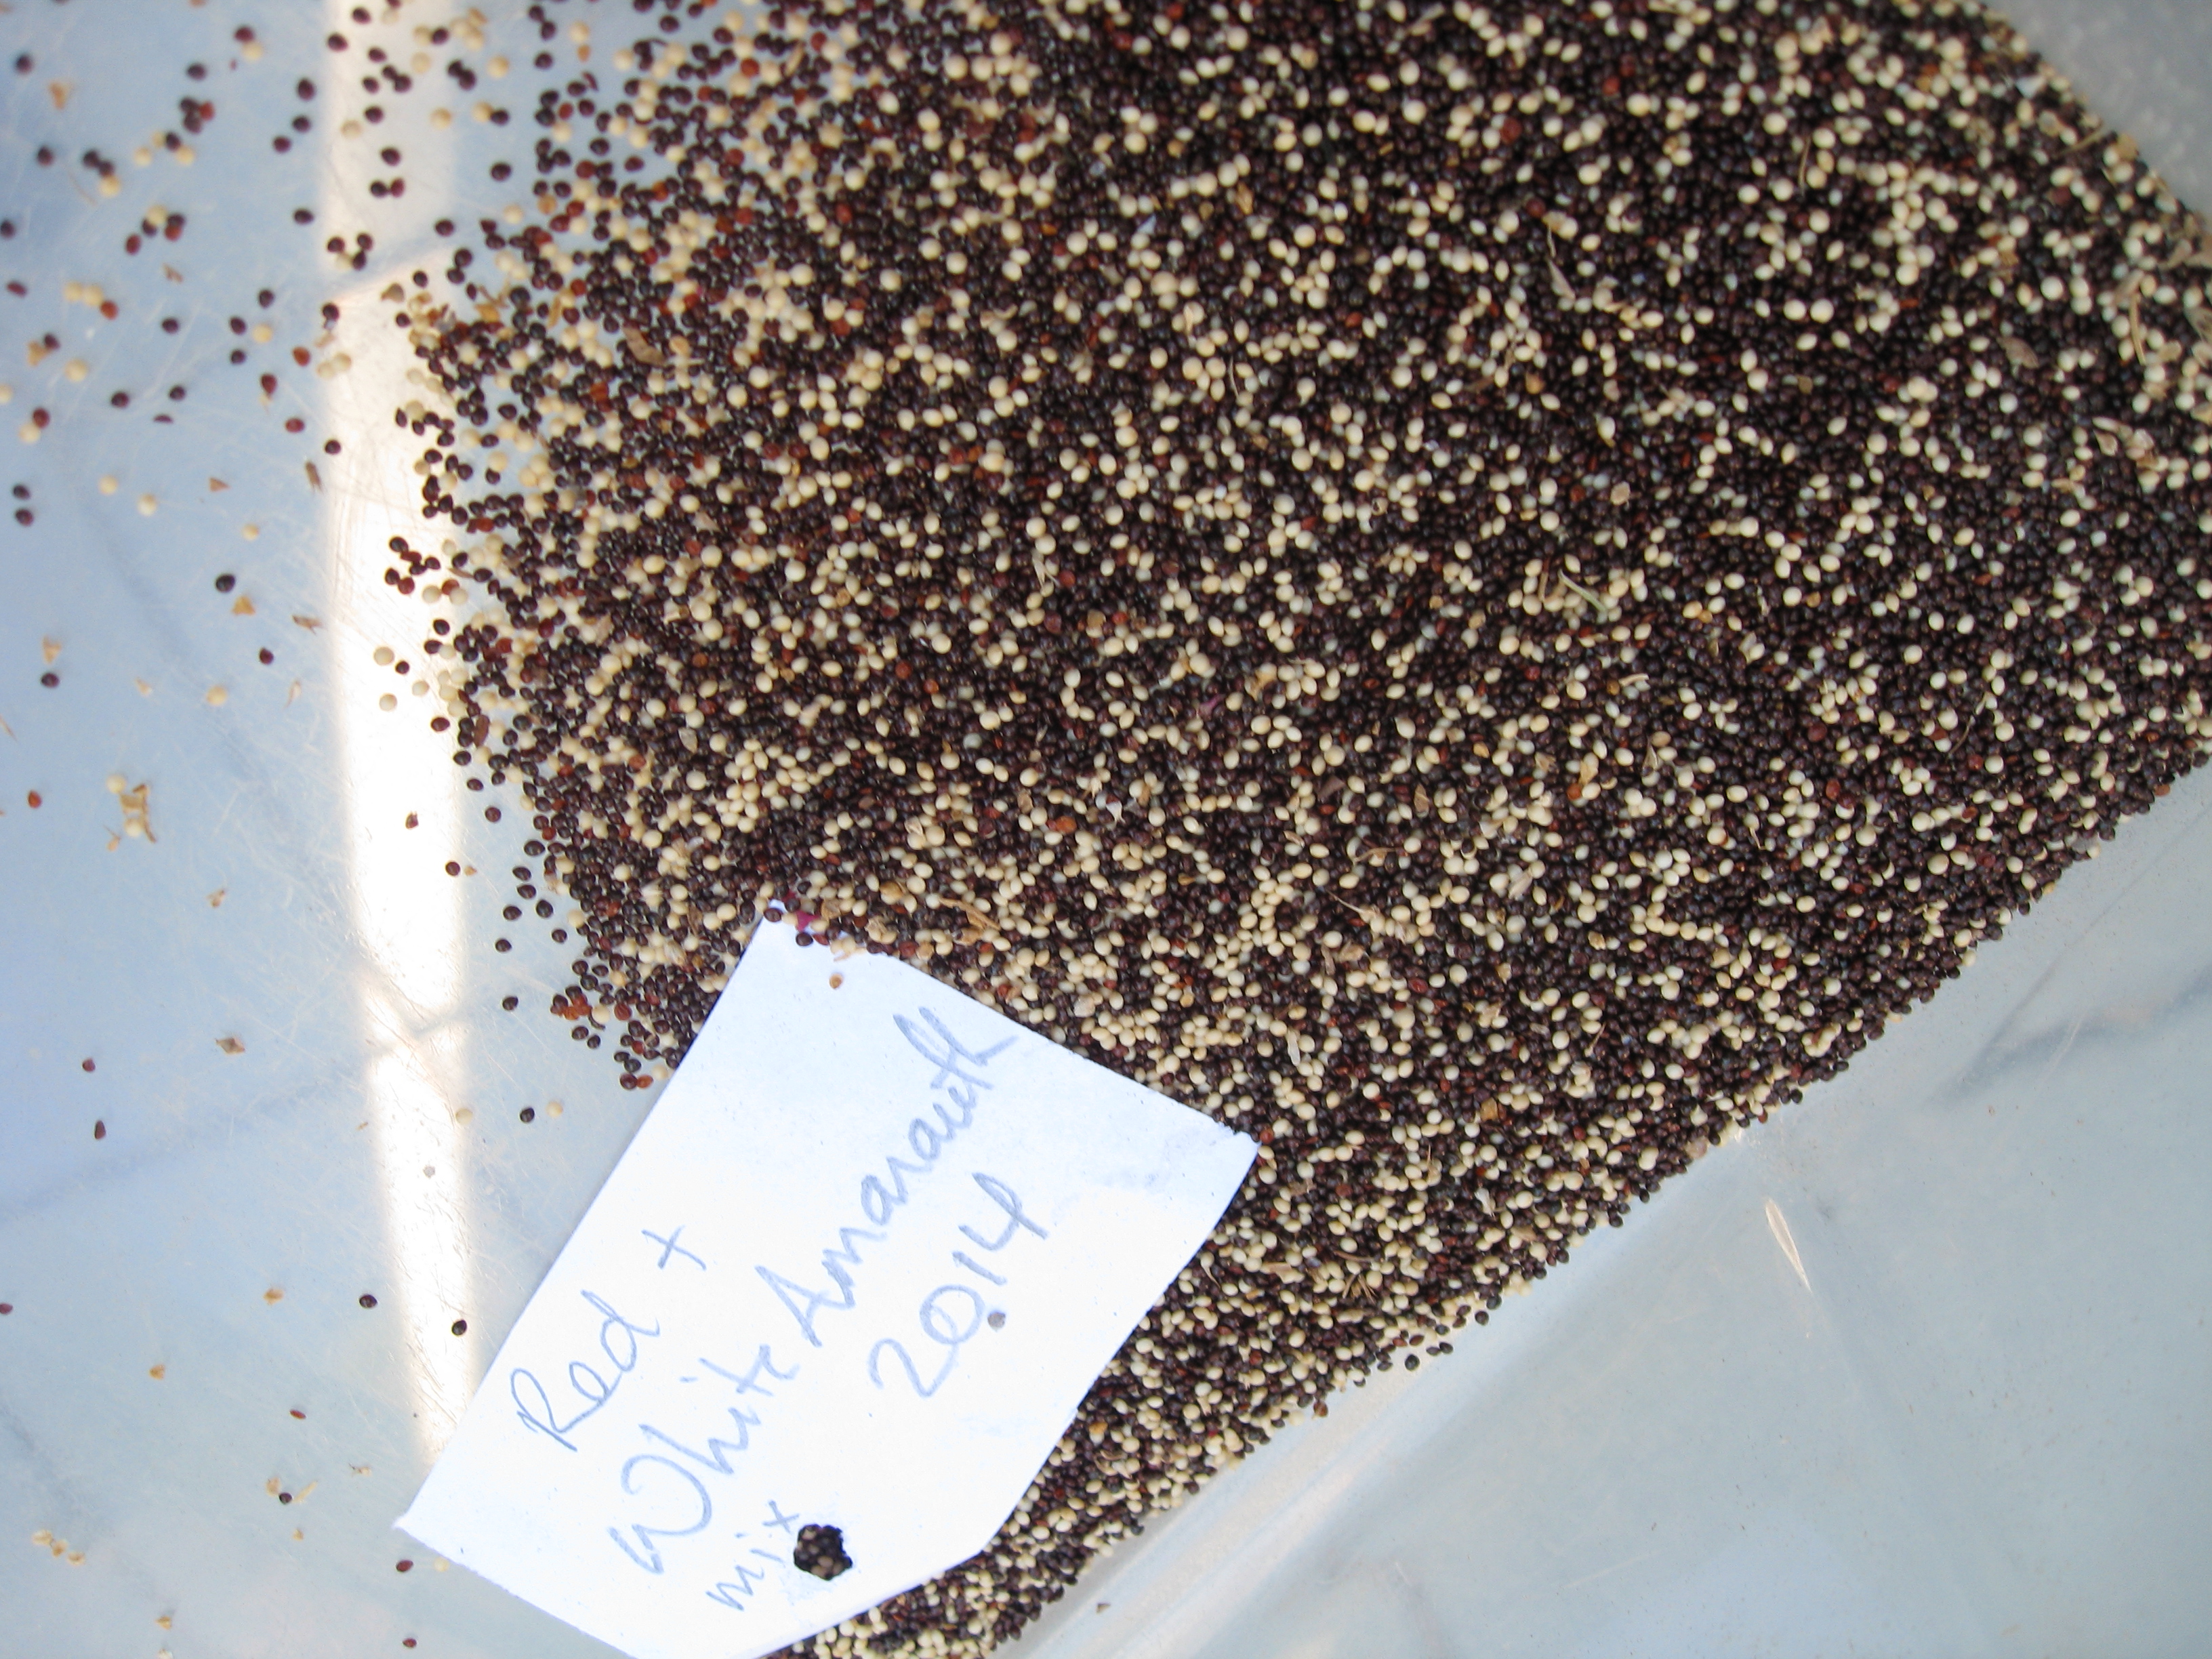 A cleaned mix of white and black amaranth seeds